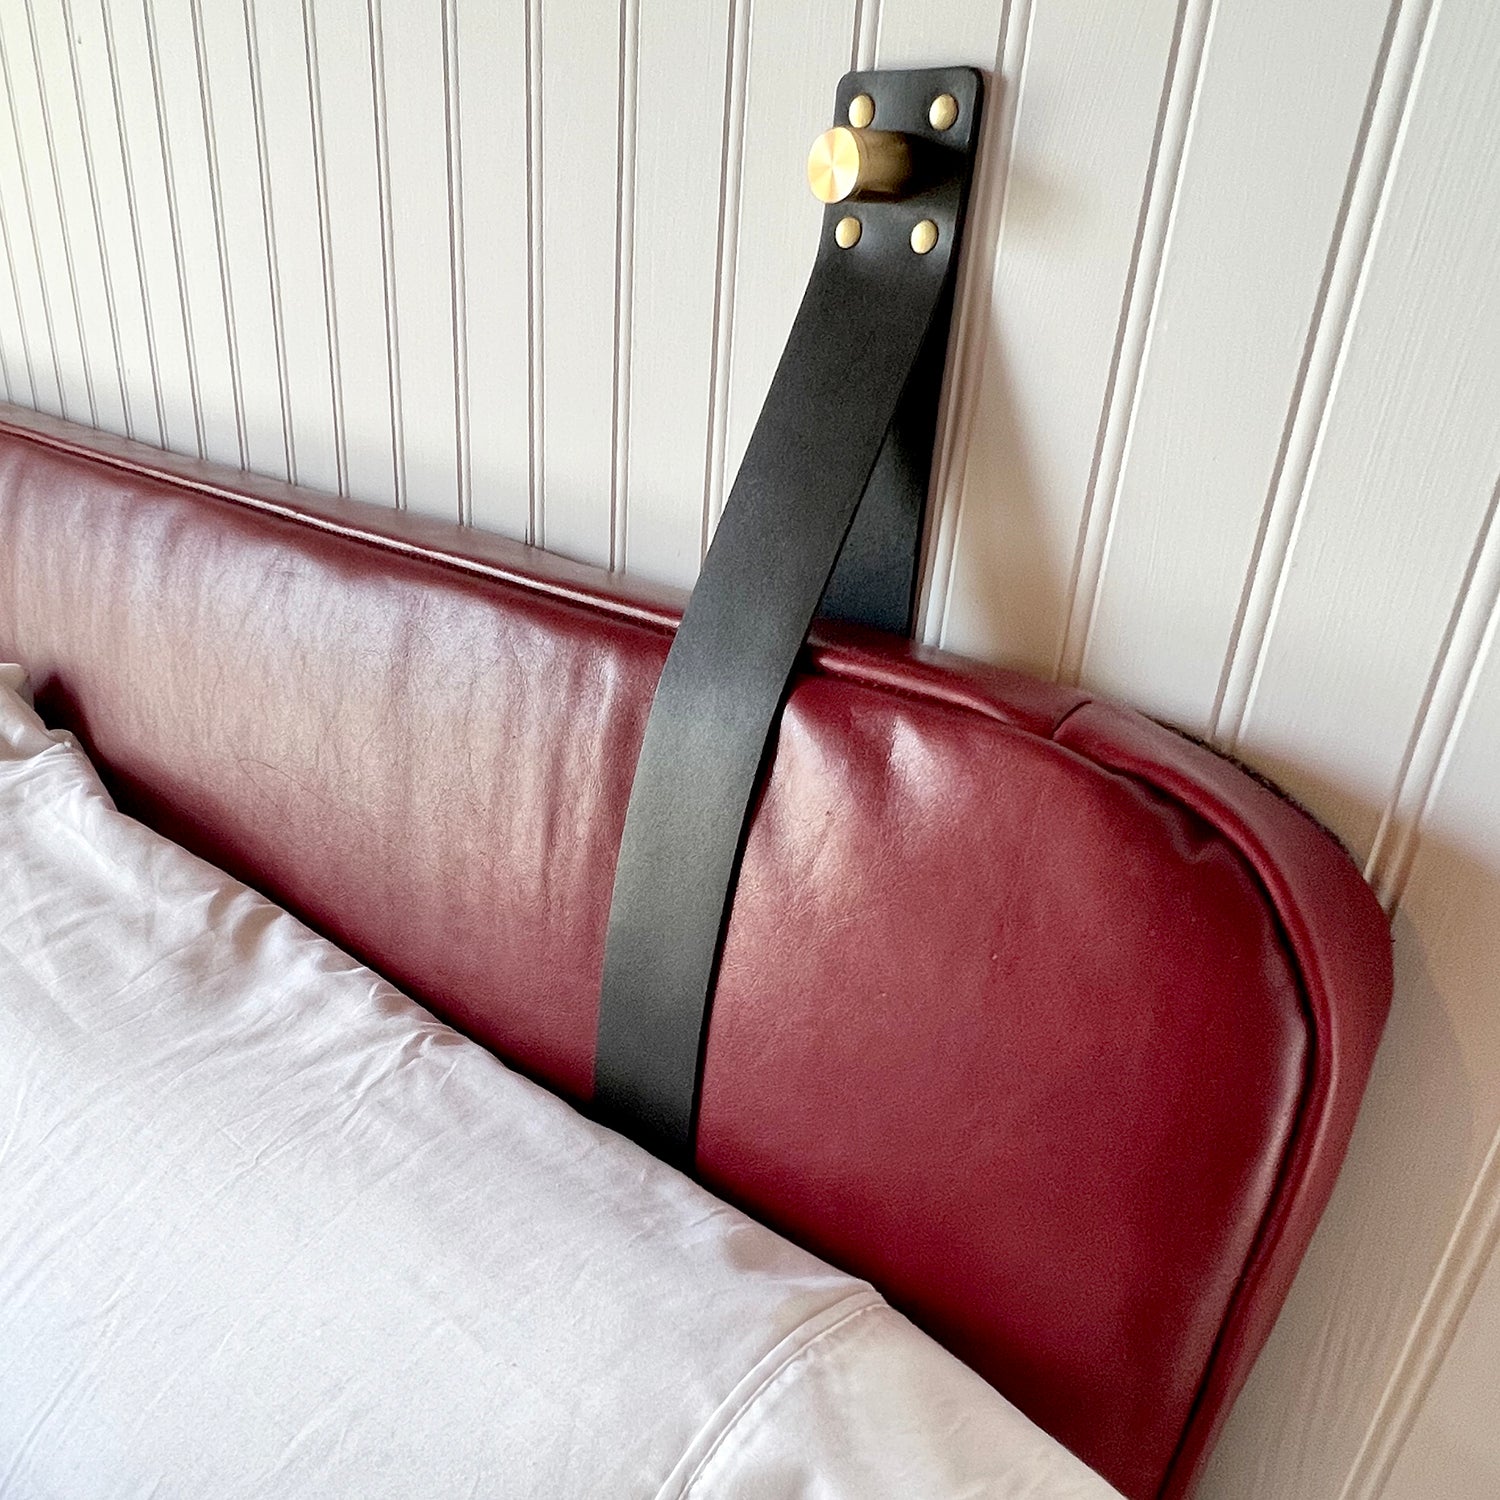 Merlot Smooth Leather Headboard or Backrest Cushion with Straps